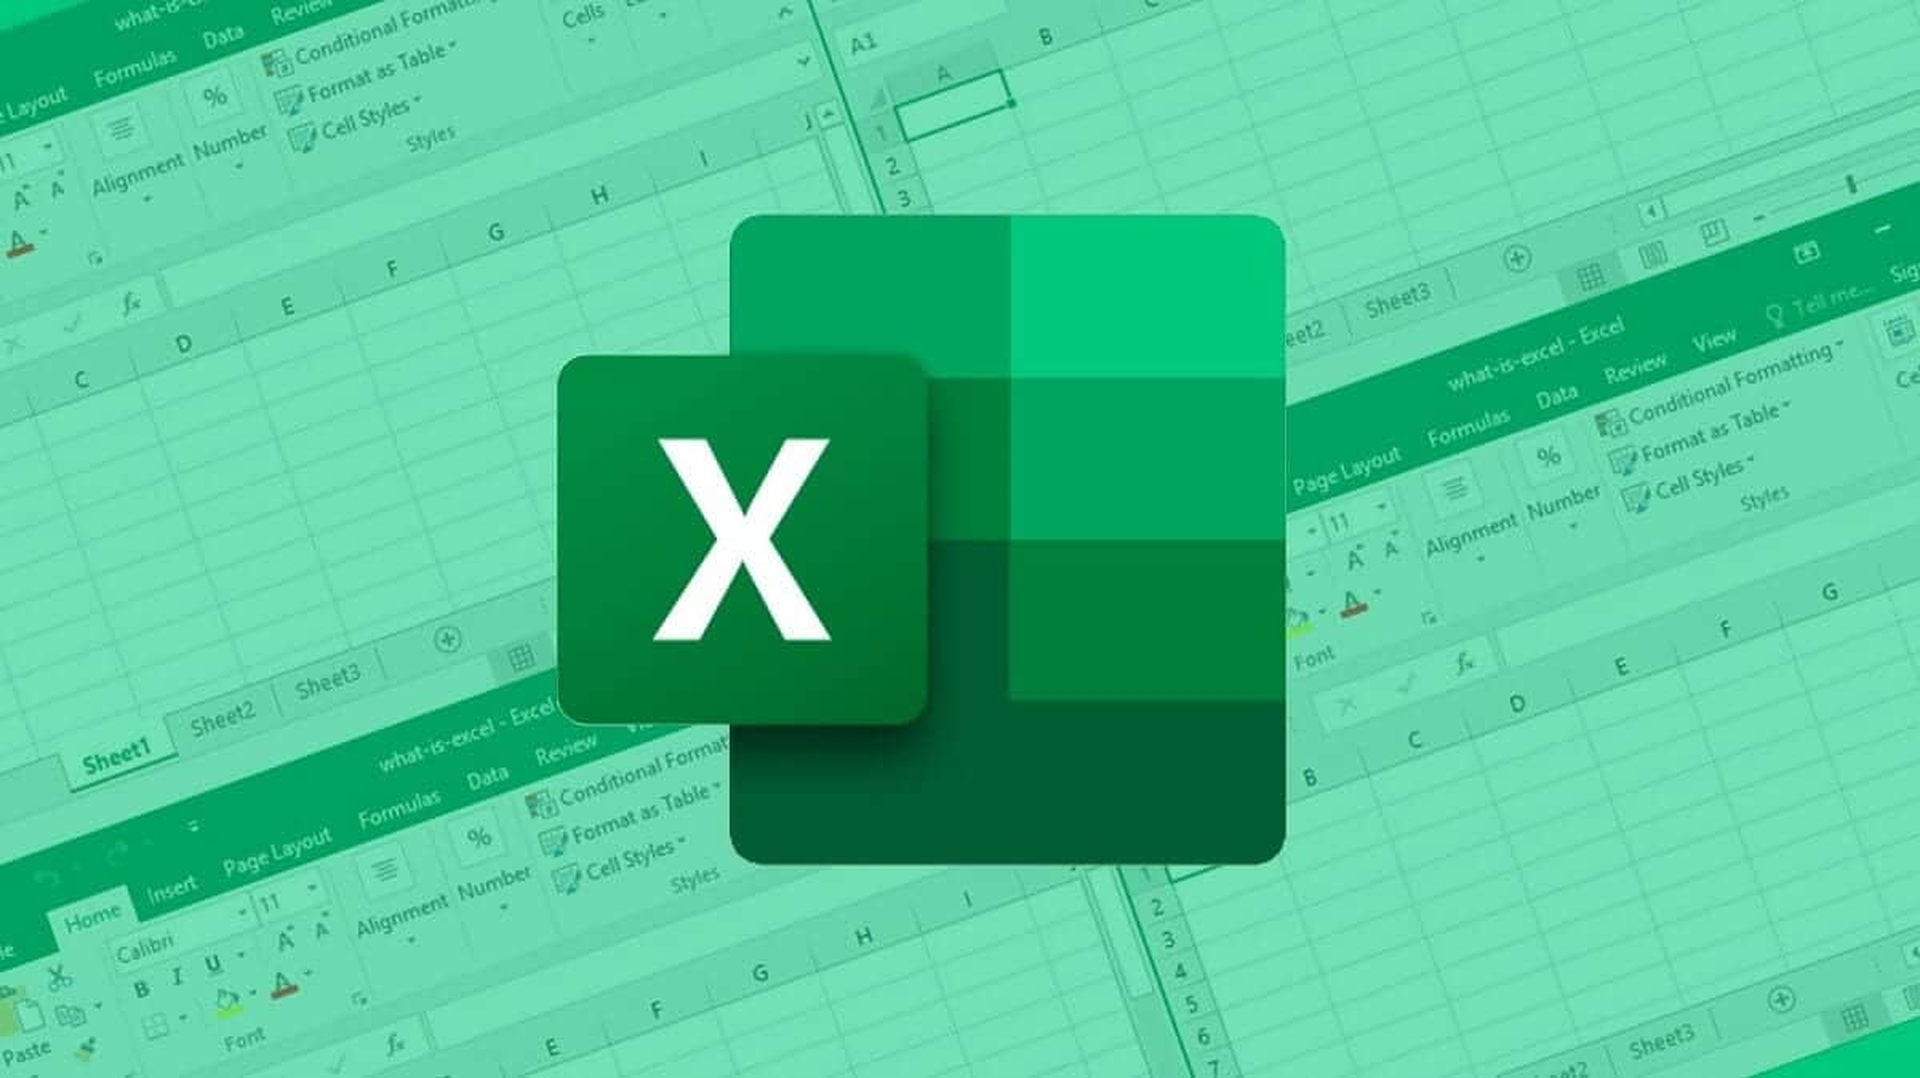 In this article, we are going to go over how to insert data from picture in Excel, on iOS, macOS, and Android, as well as the feature coming to PC.